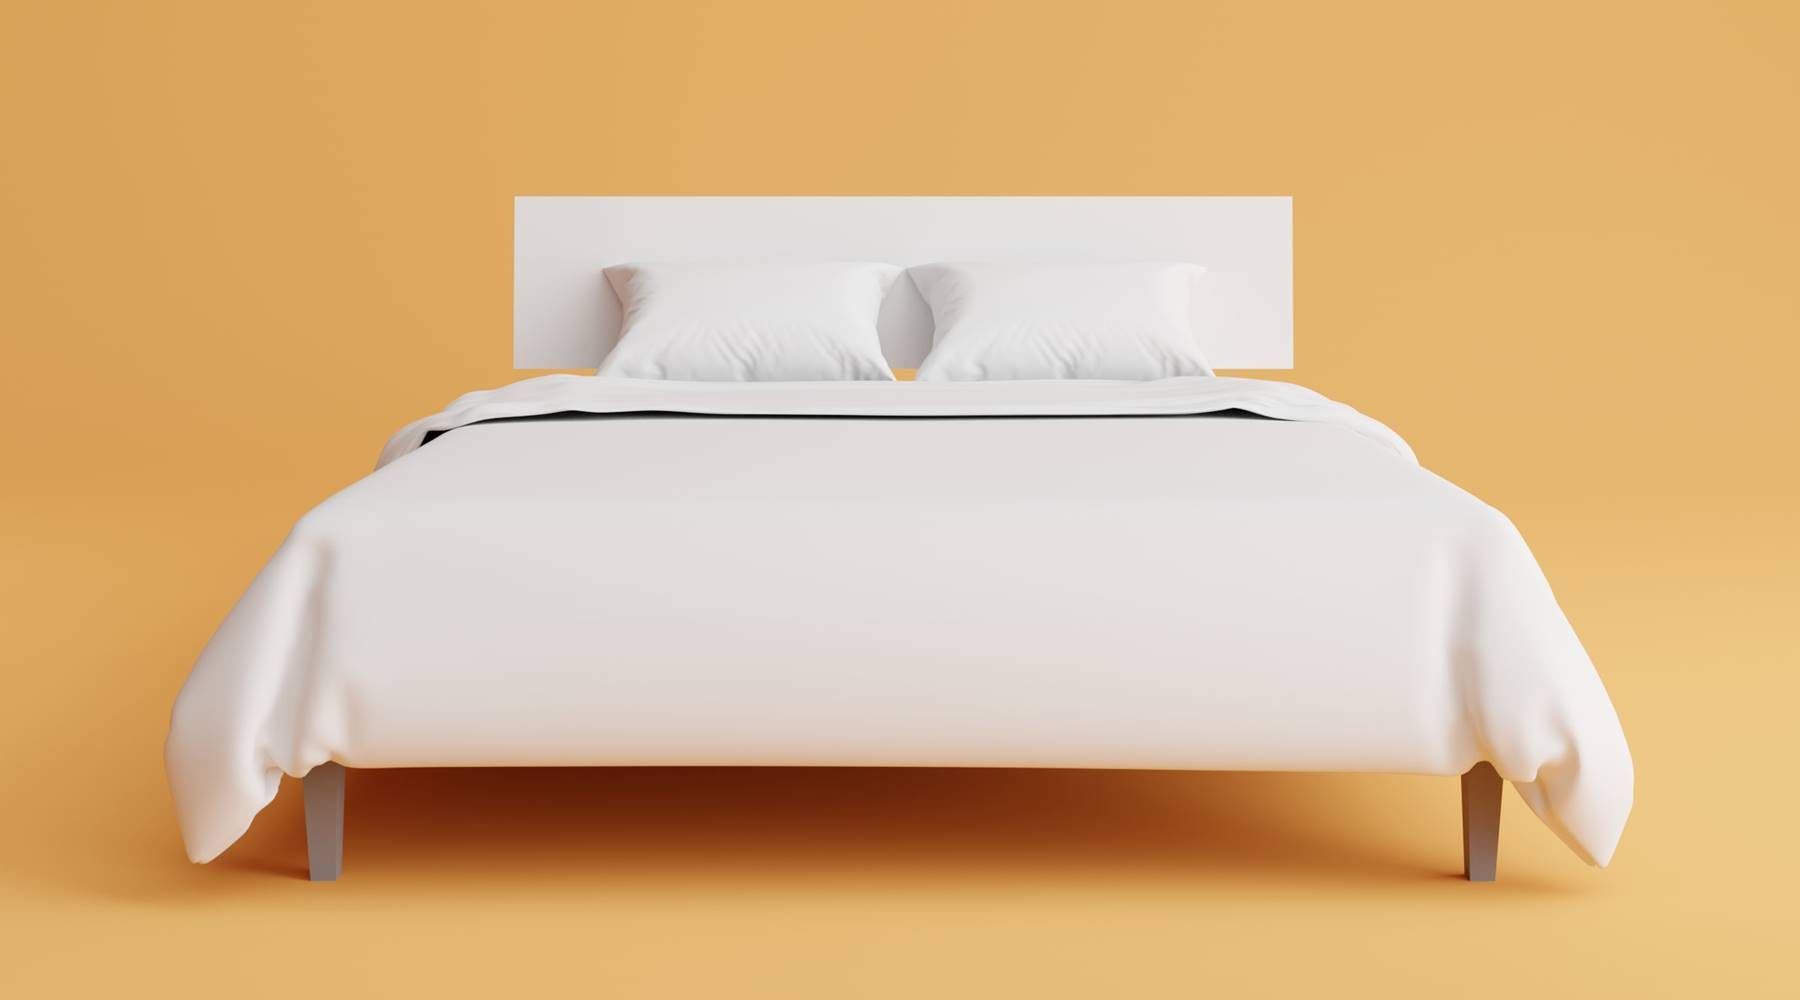 Mattress with white sheets, pillow, and headboard on an orange background.